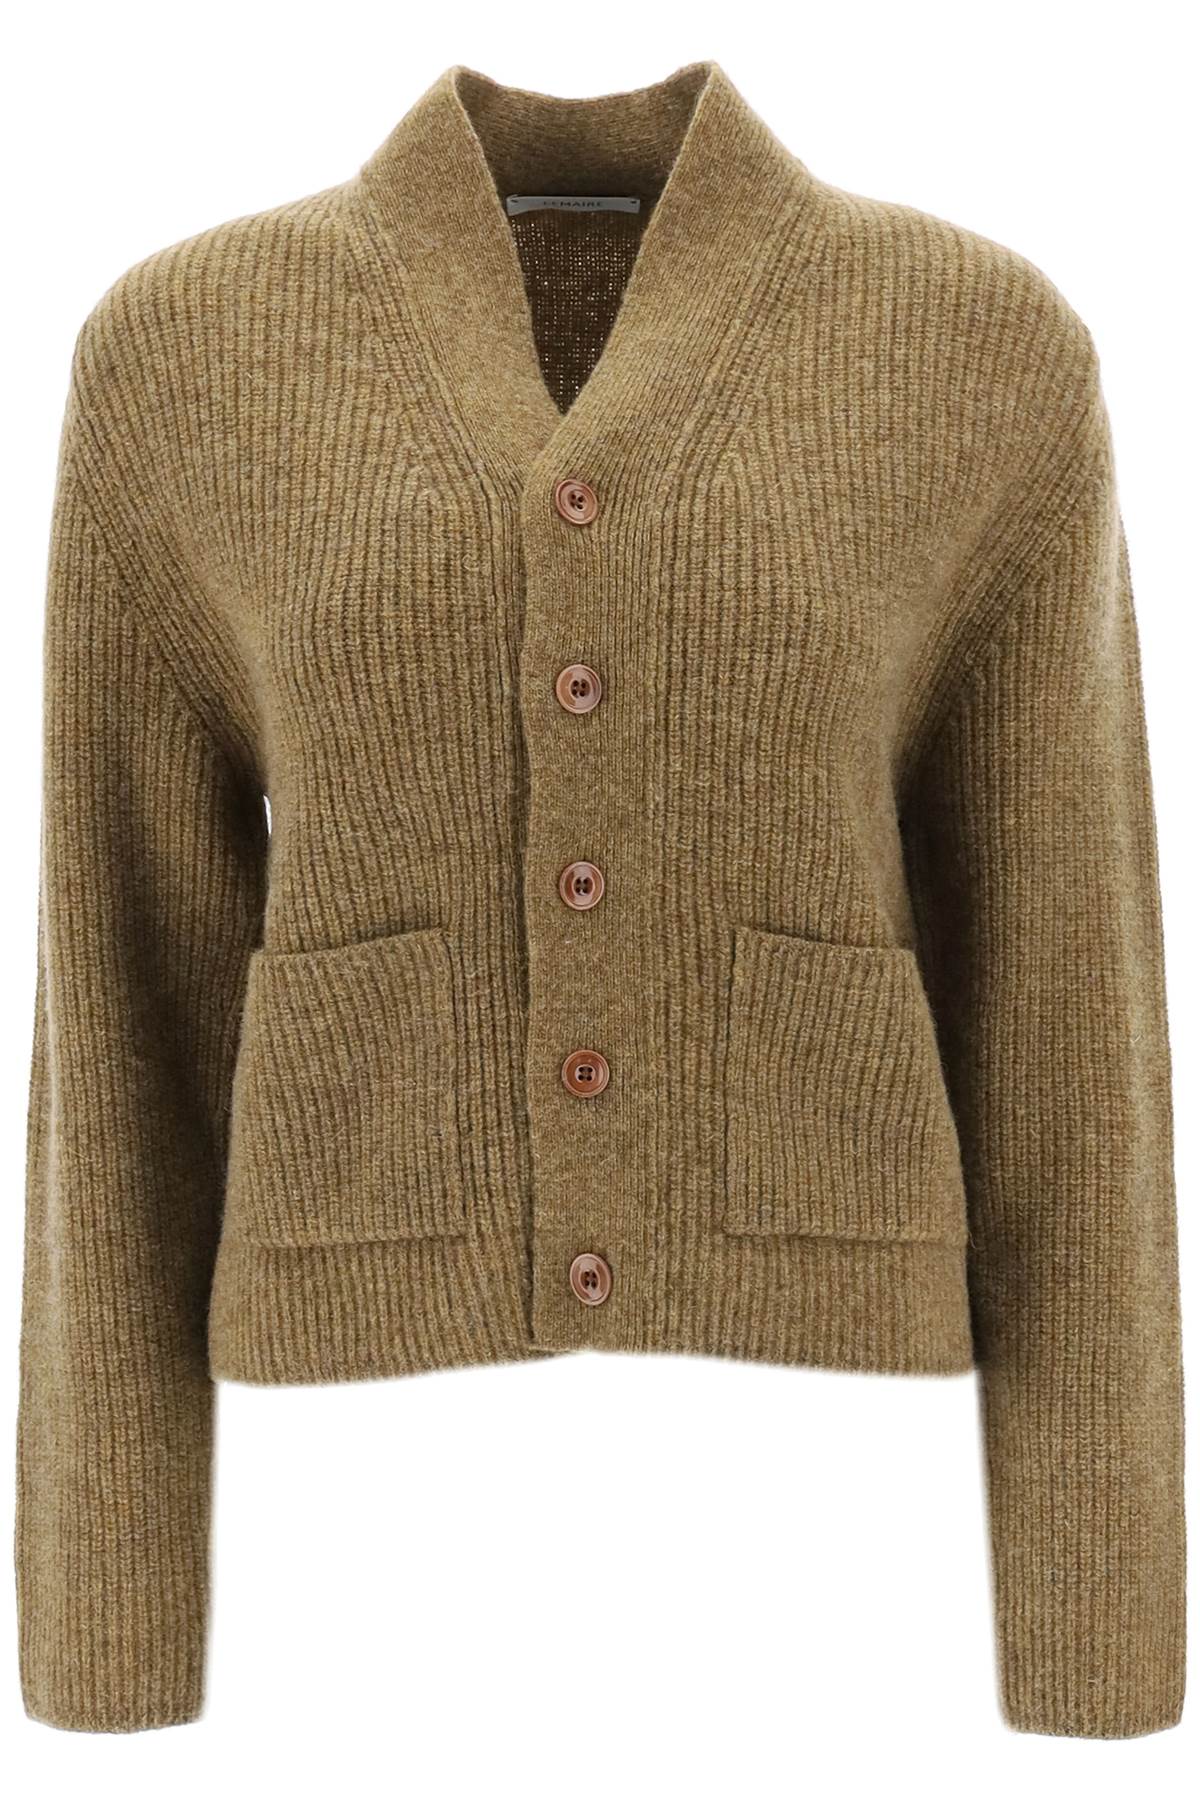 LEMAIRE CROPPED WOOL CARDIGAN